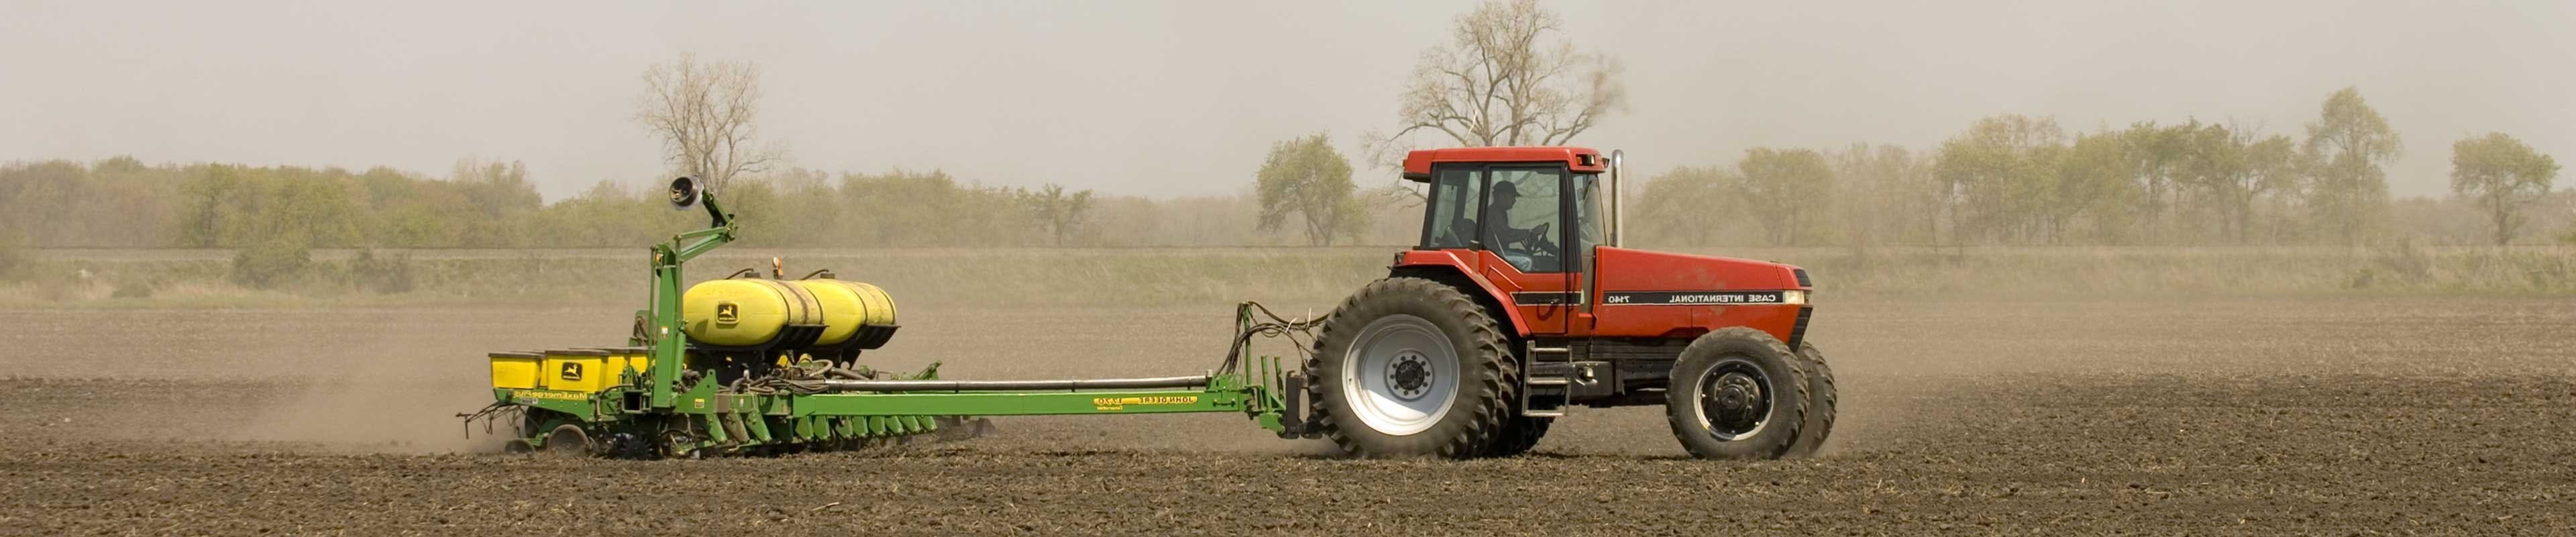 Image of a tractor and planter in a field.